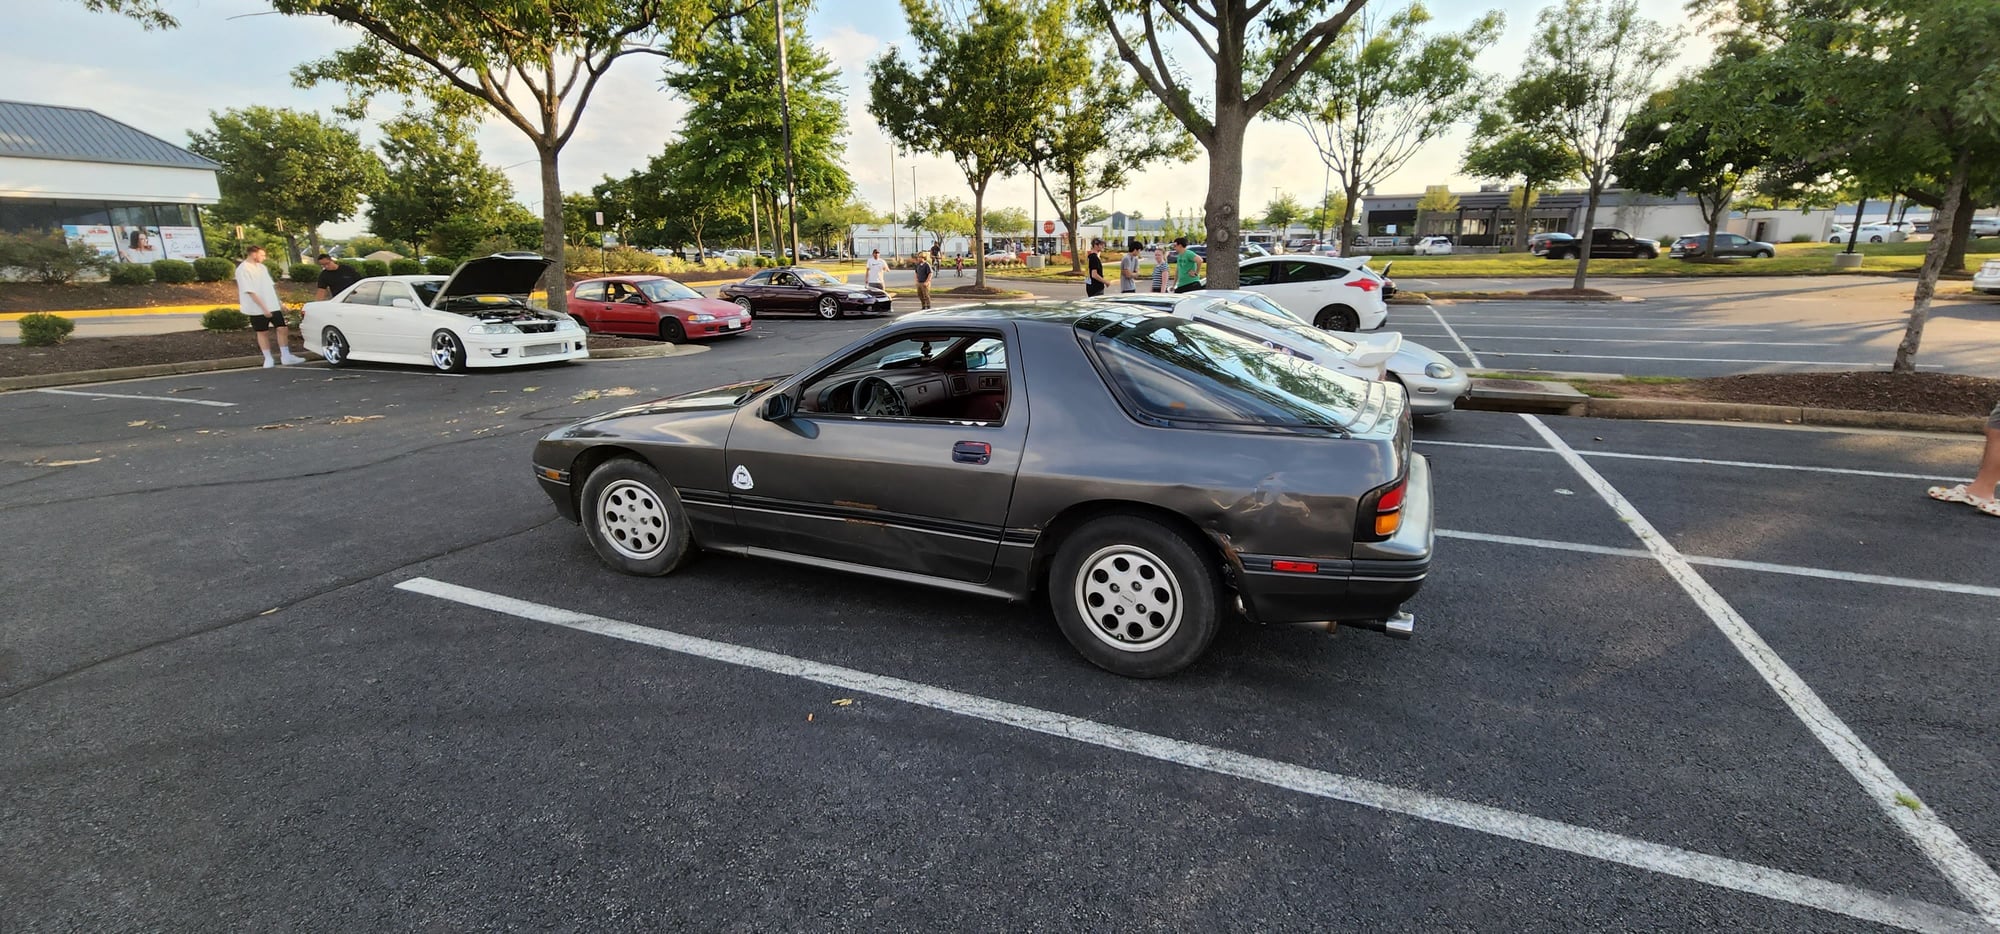 Miscellaneous - ISO Roof Rack 86 rx7 - Used - 1986 to 1991 Mazda RX-7 - Springfield, VA 22150, United States